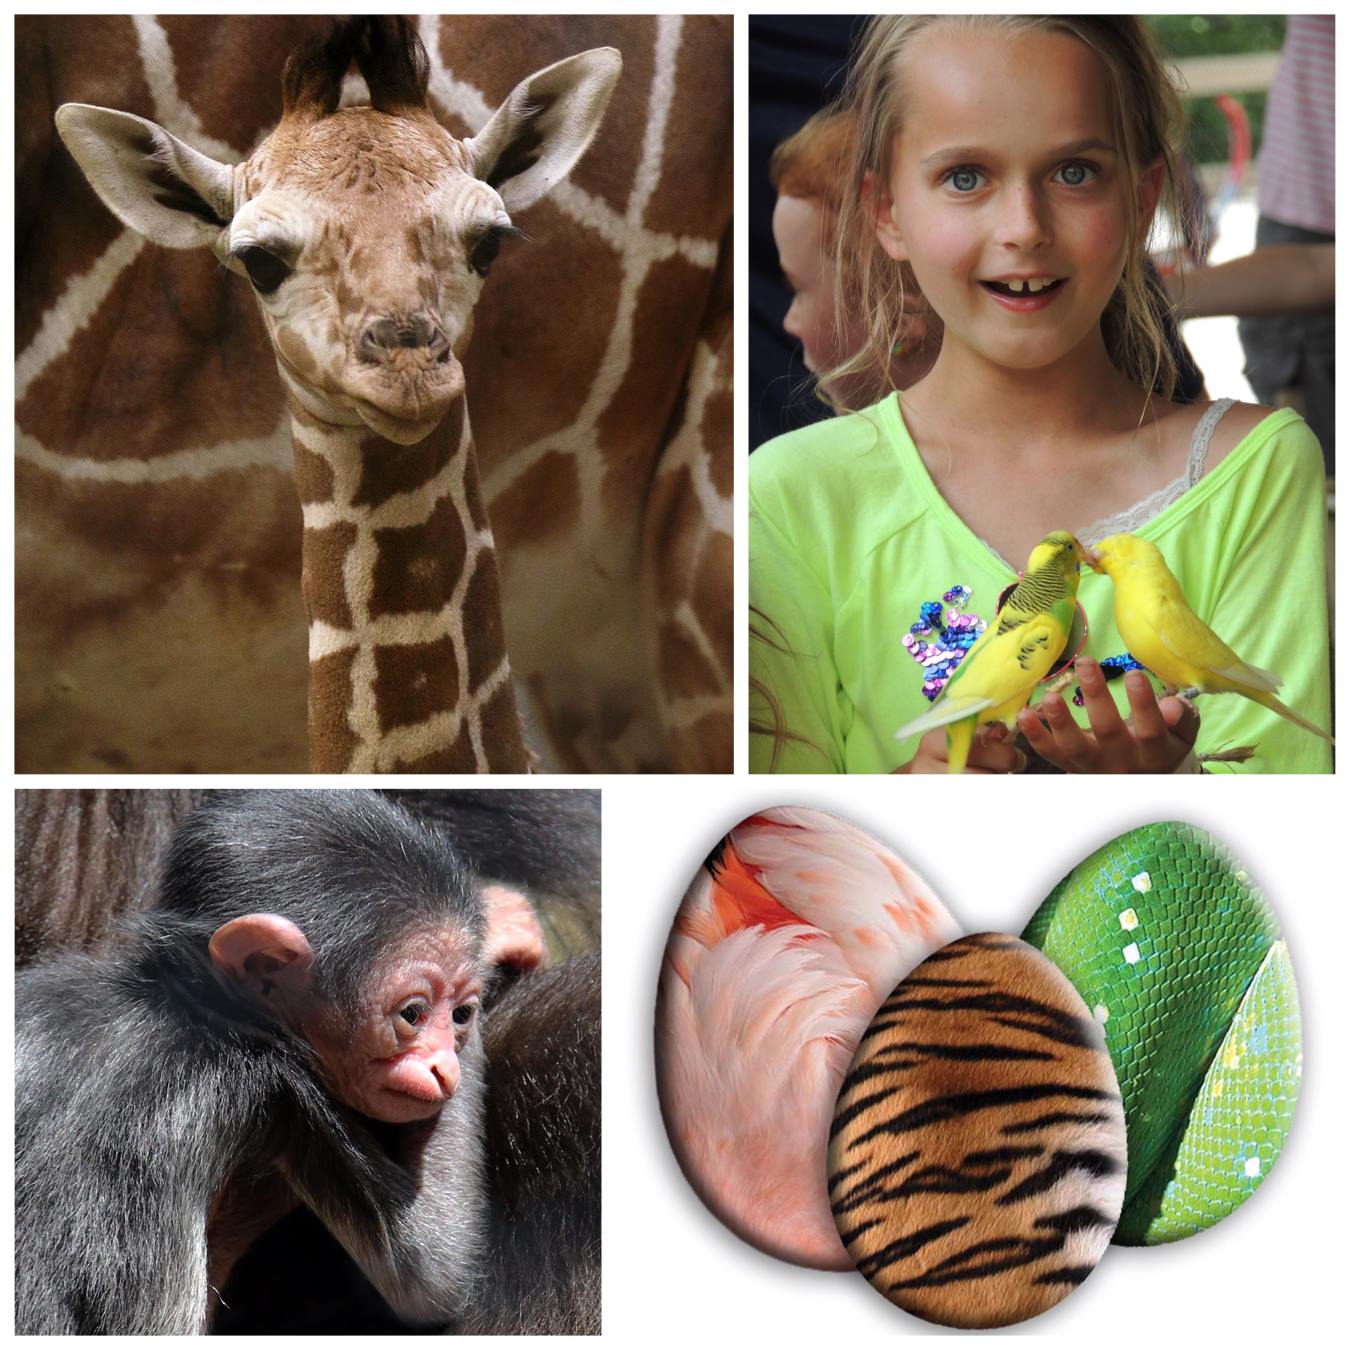 Celebrate Easter and New Beginnings at the Zoo Baby animals in the spotlight during weekend activities